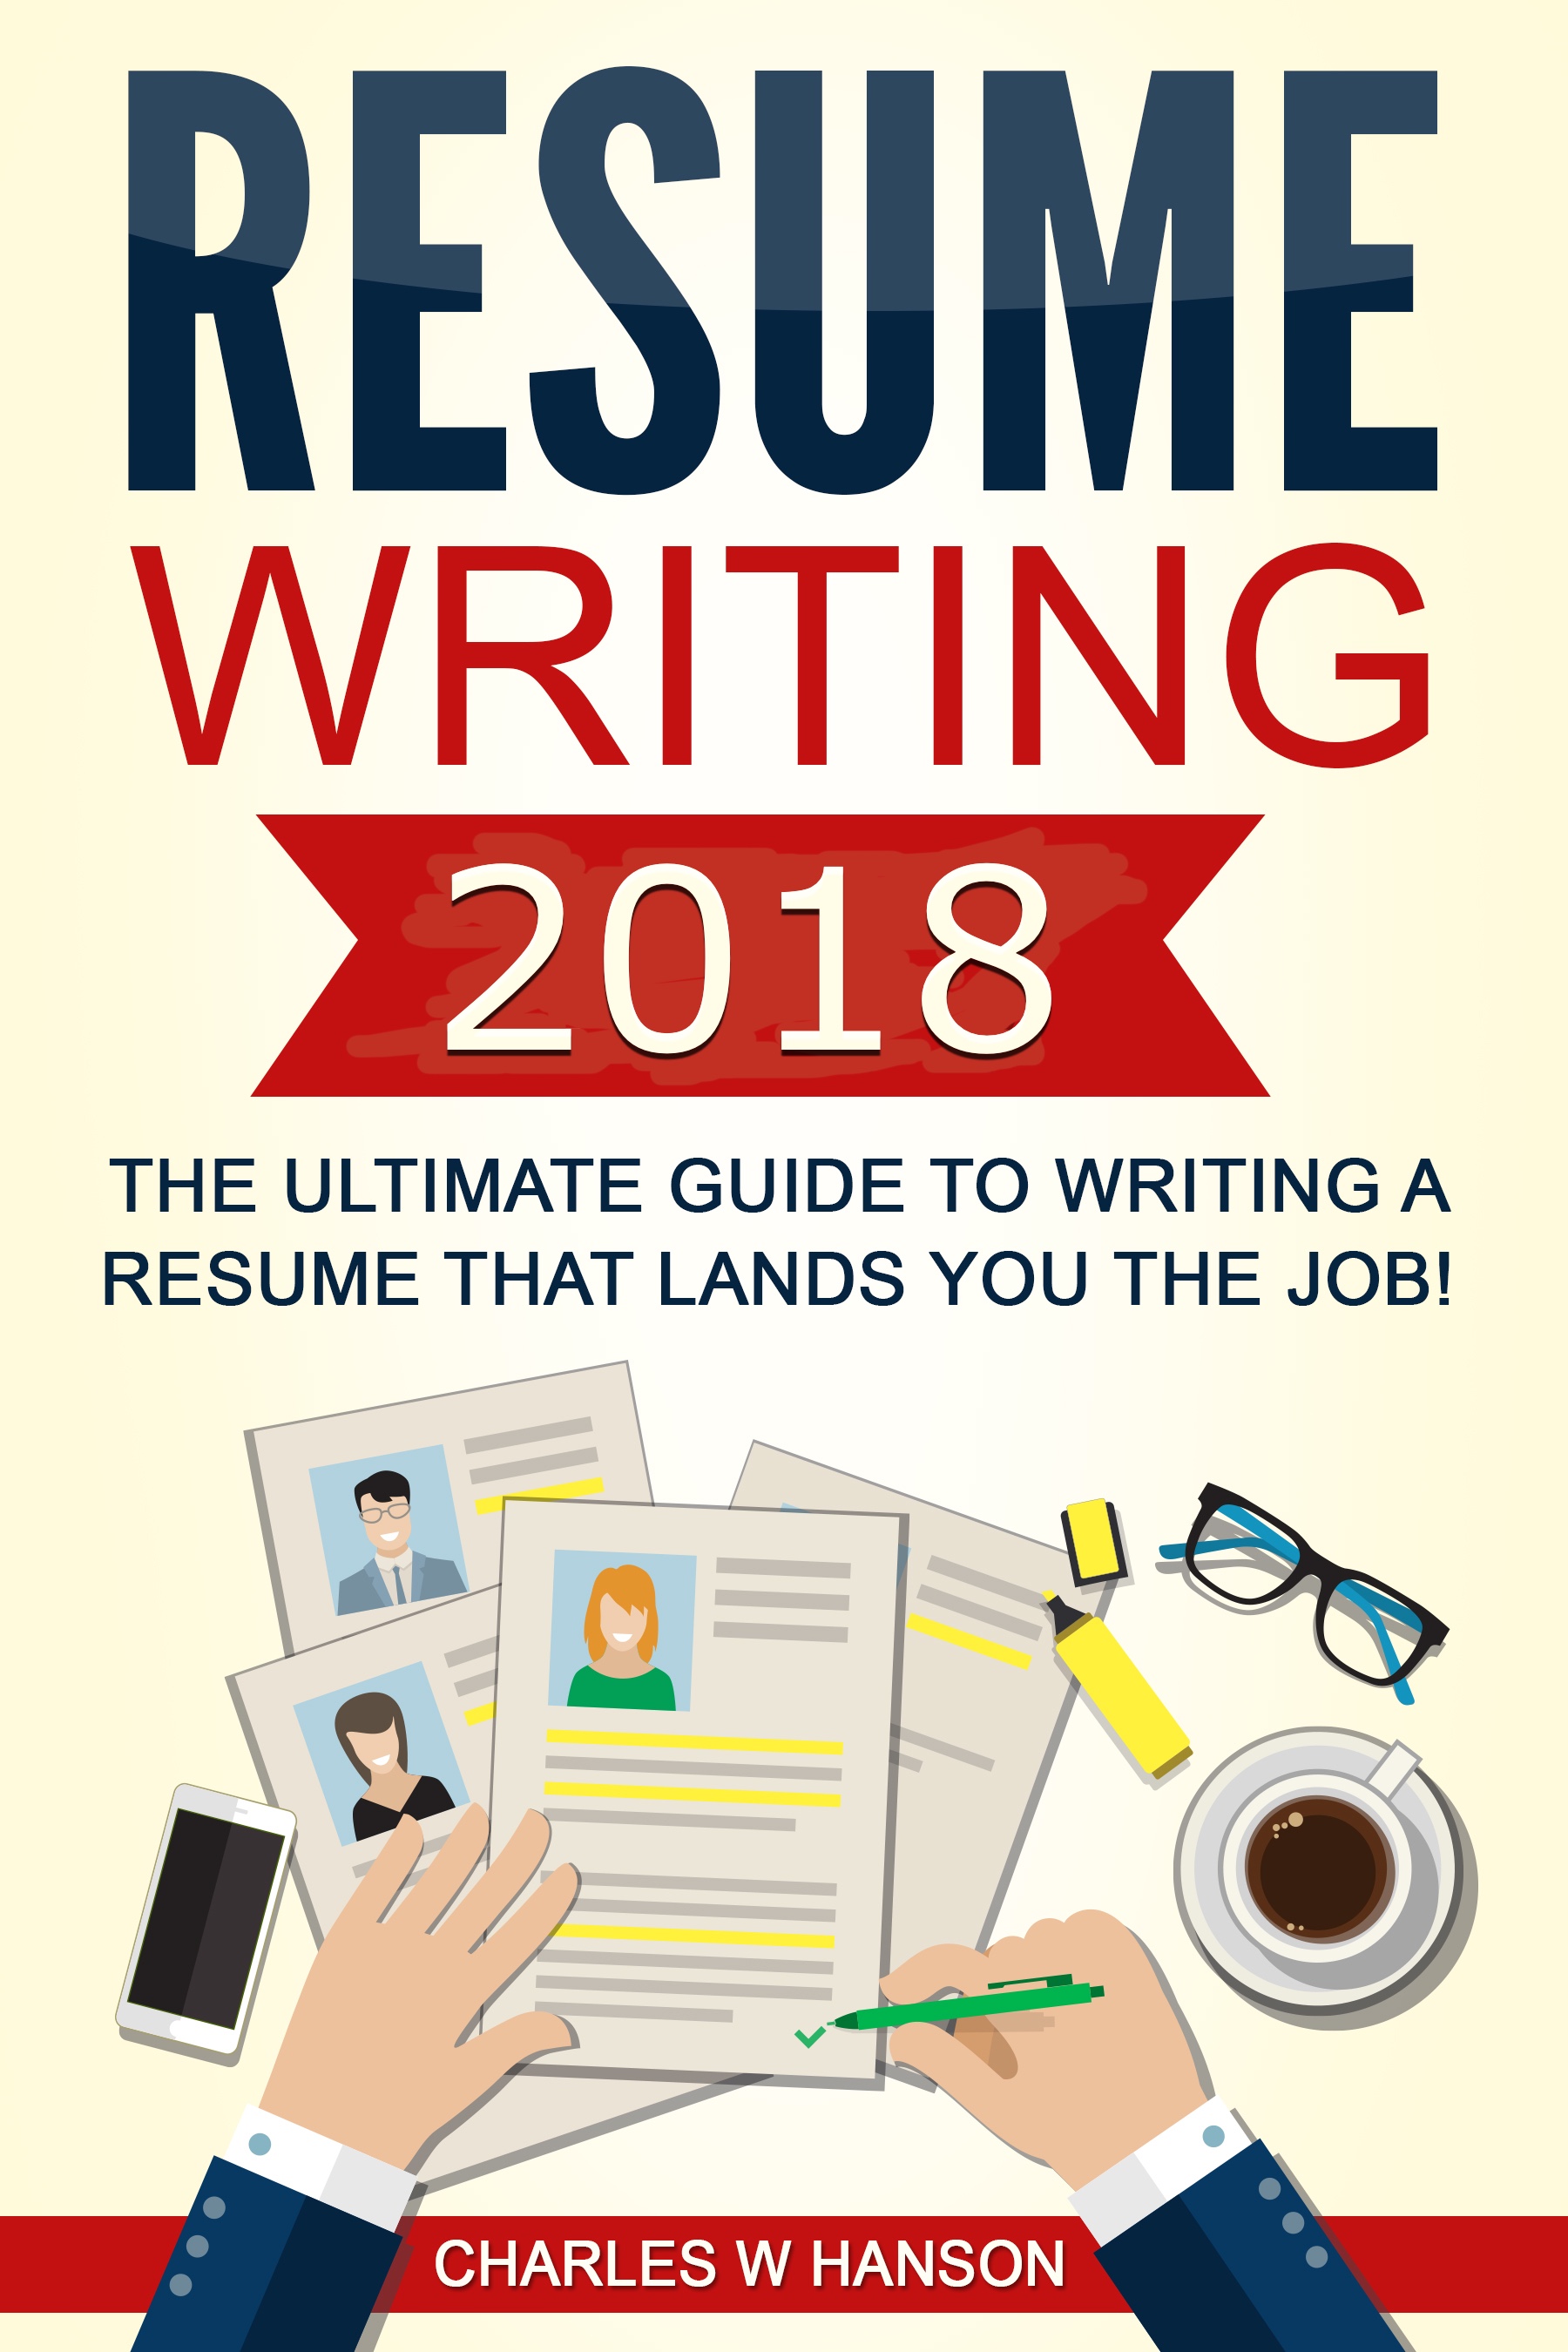 FREE: Resume: Writing 2018 The Ultimate Guide to Writing a Resume that Lands YOU the Job! by Charles W Hanson